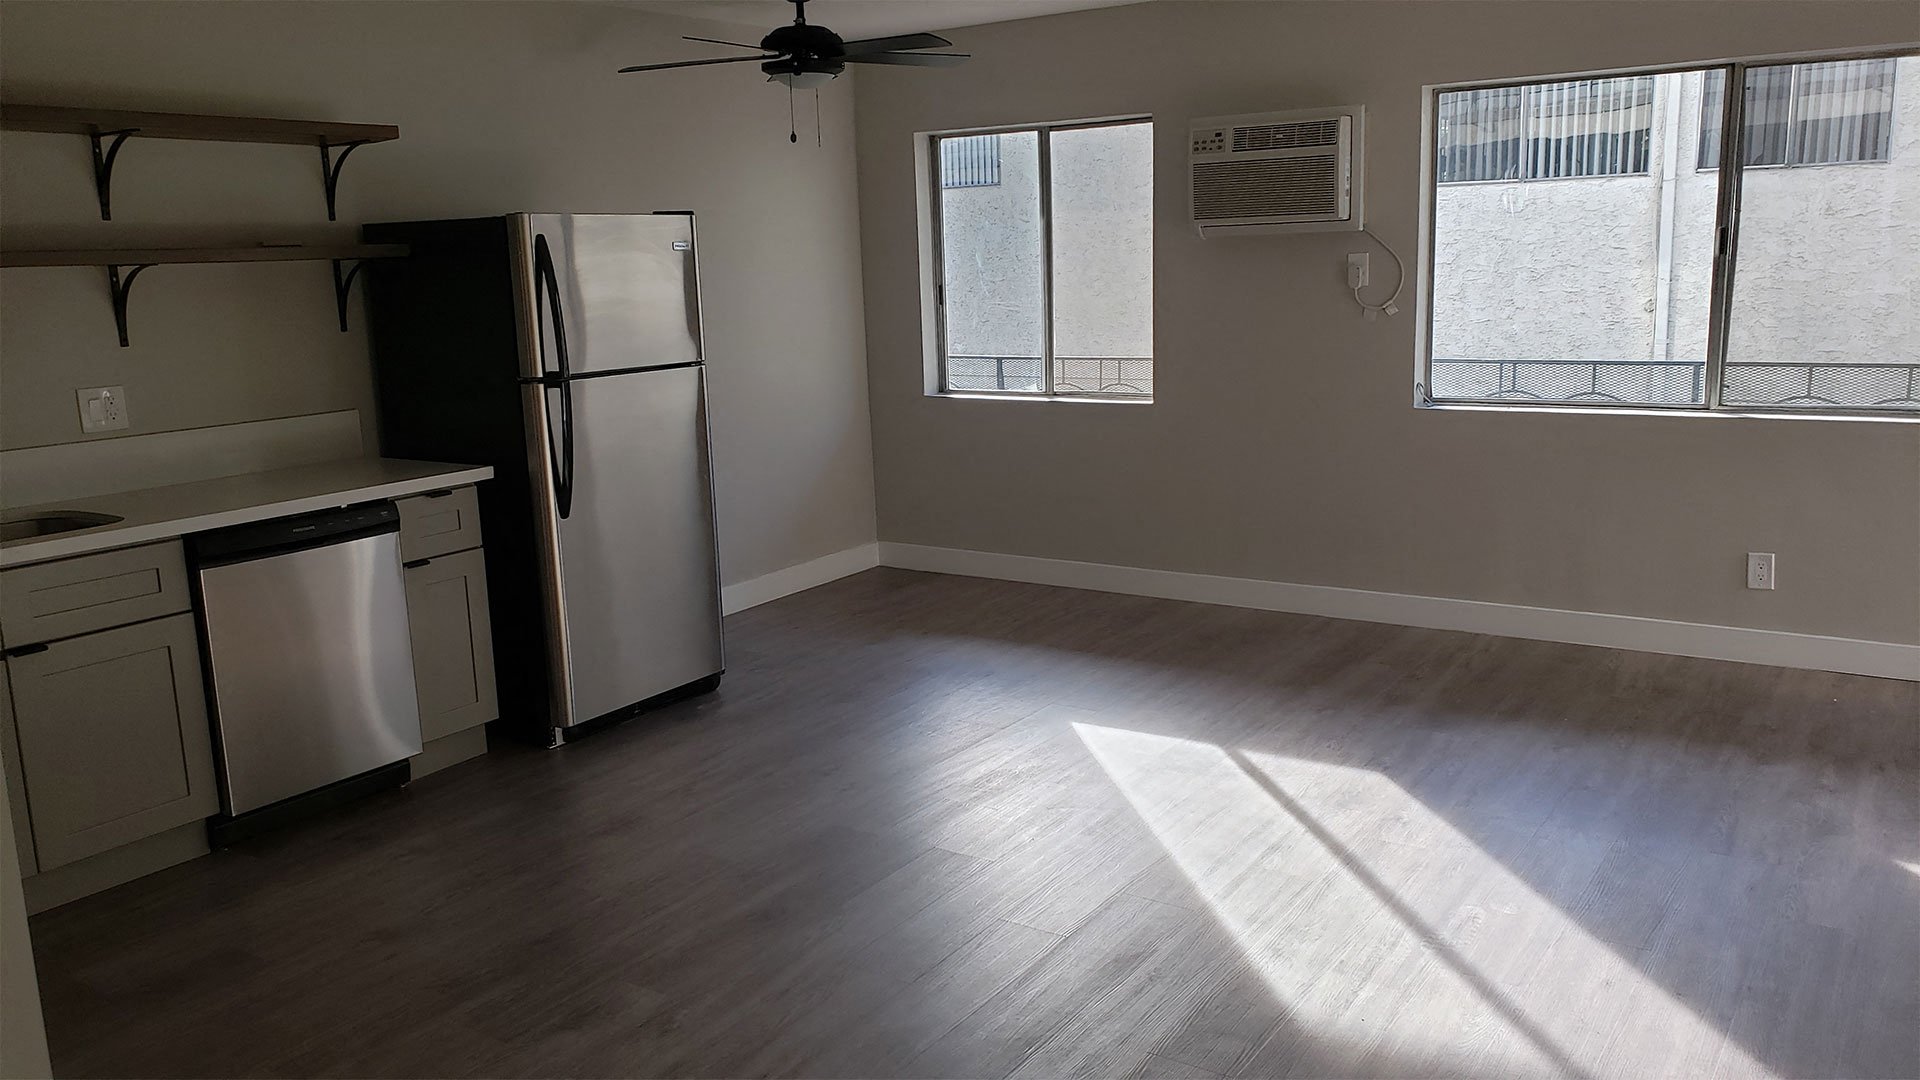 Kitchen Area With AC Unit, Hard-Wood Flooring, Plenty of Natural Light at Wilson Apartments in Glendale, CA